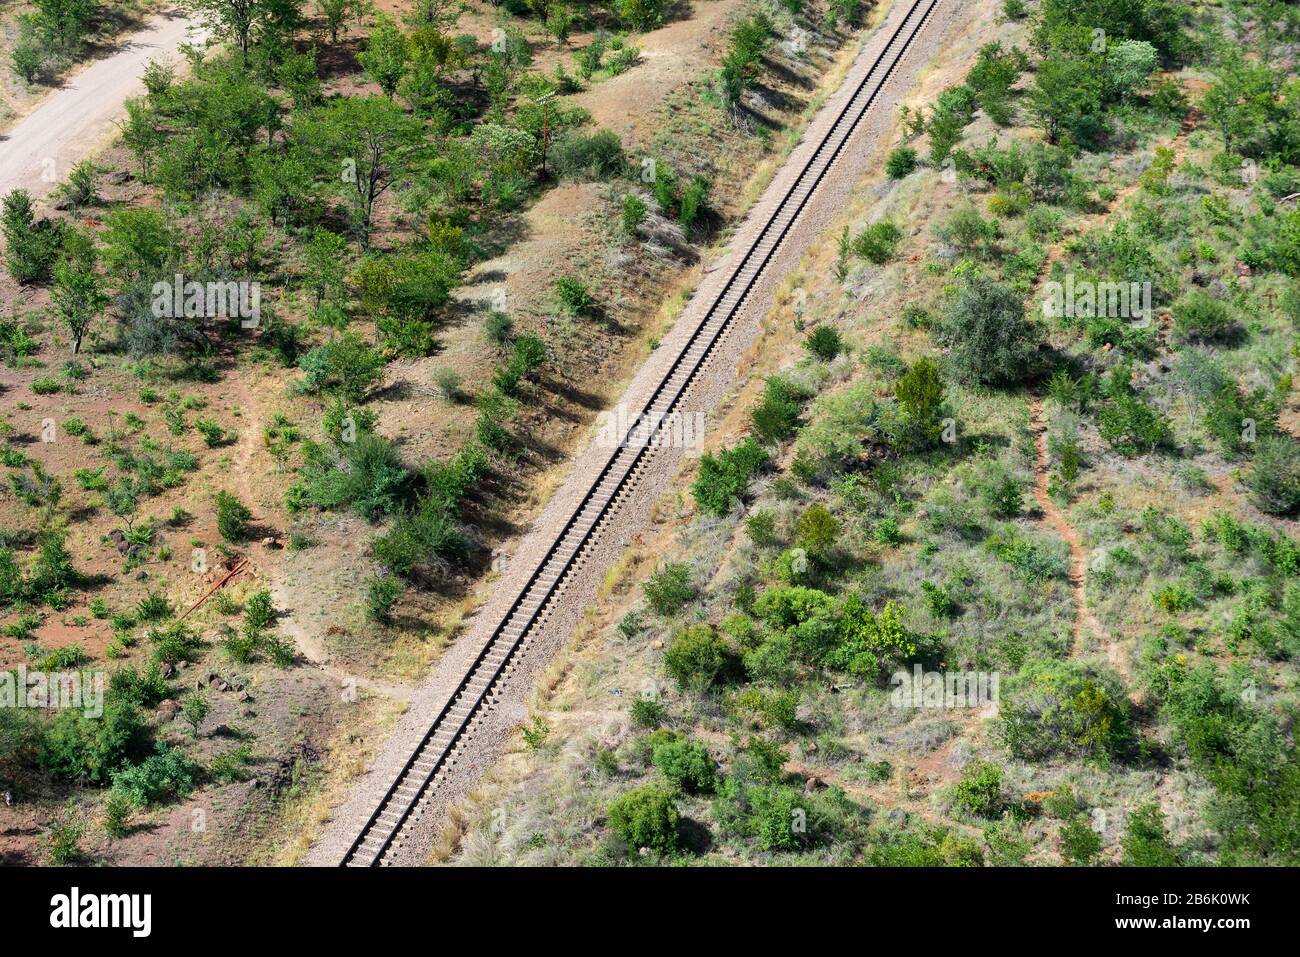 Aerial view of railway track surrounded by green vegetation and dry soil in Victoria Falls, Zimbabwe in Africa. Stock Photo